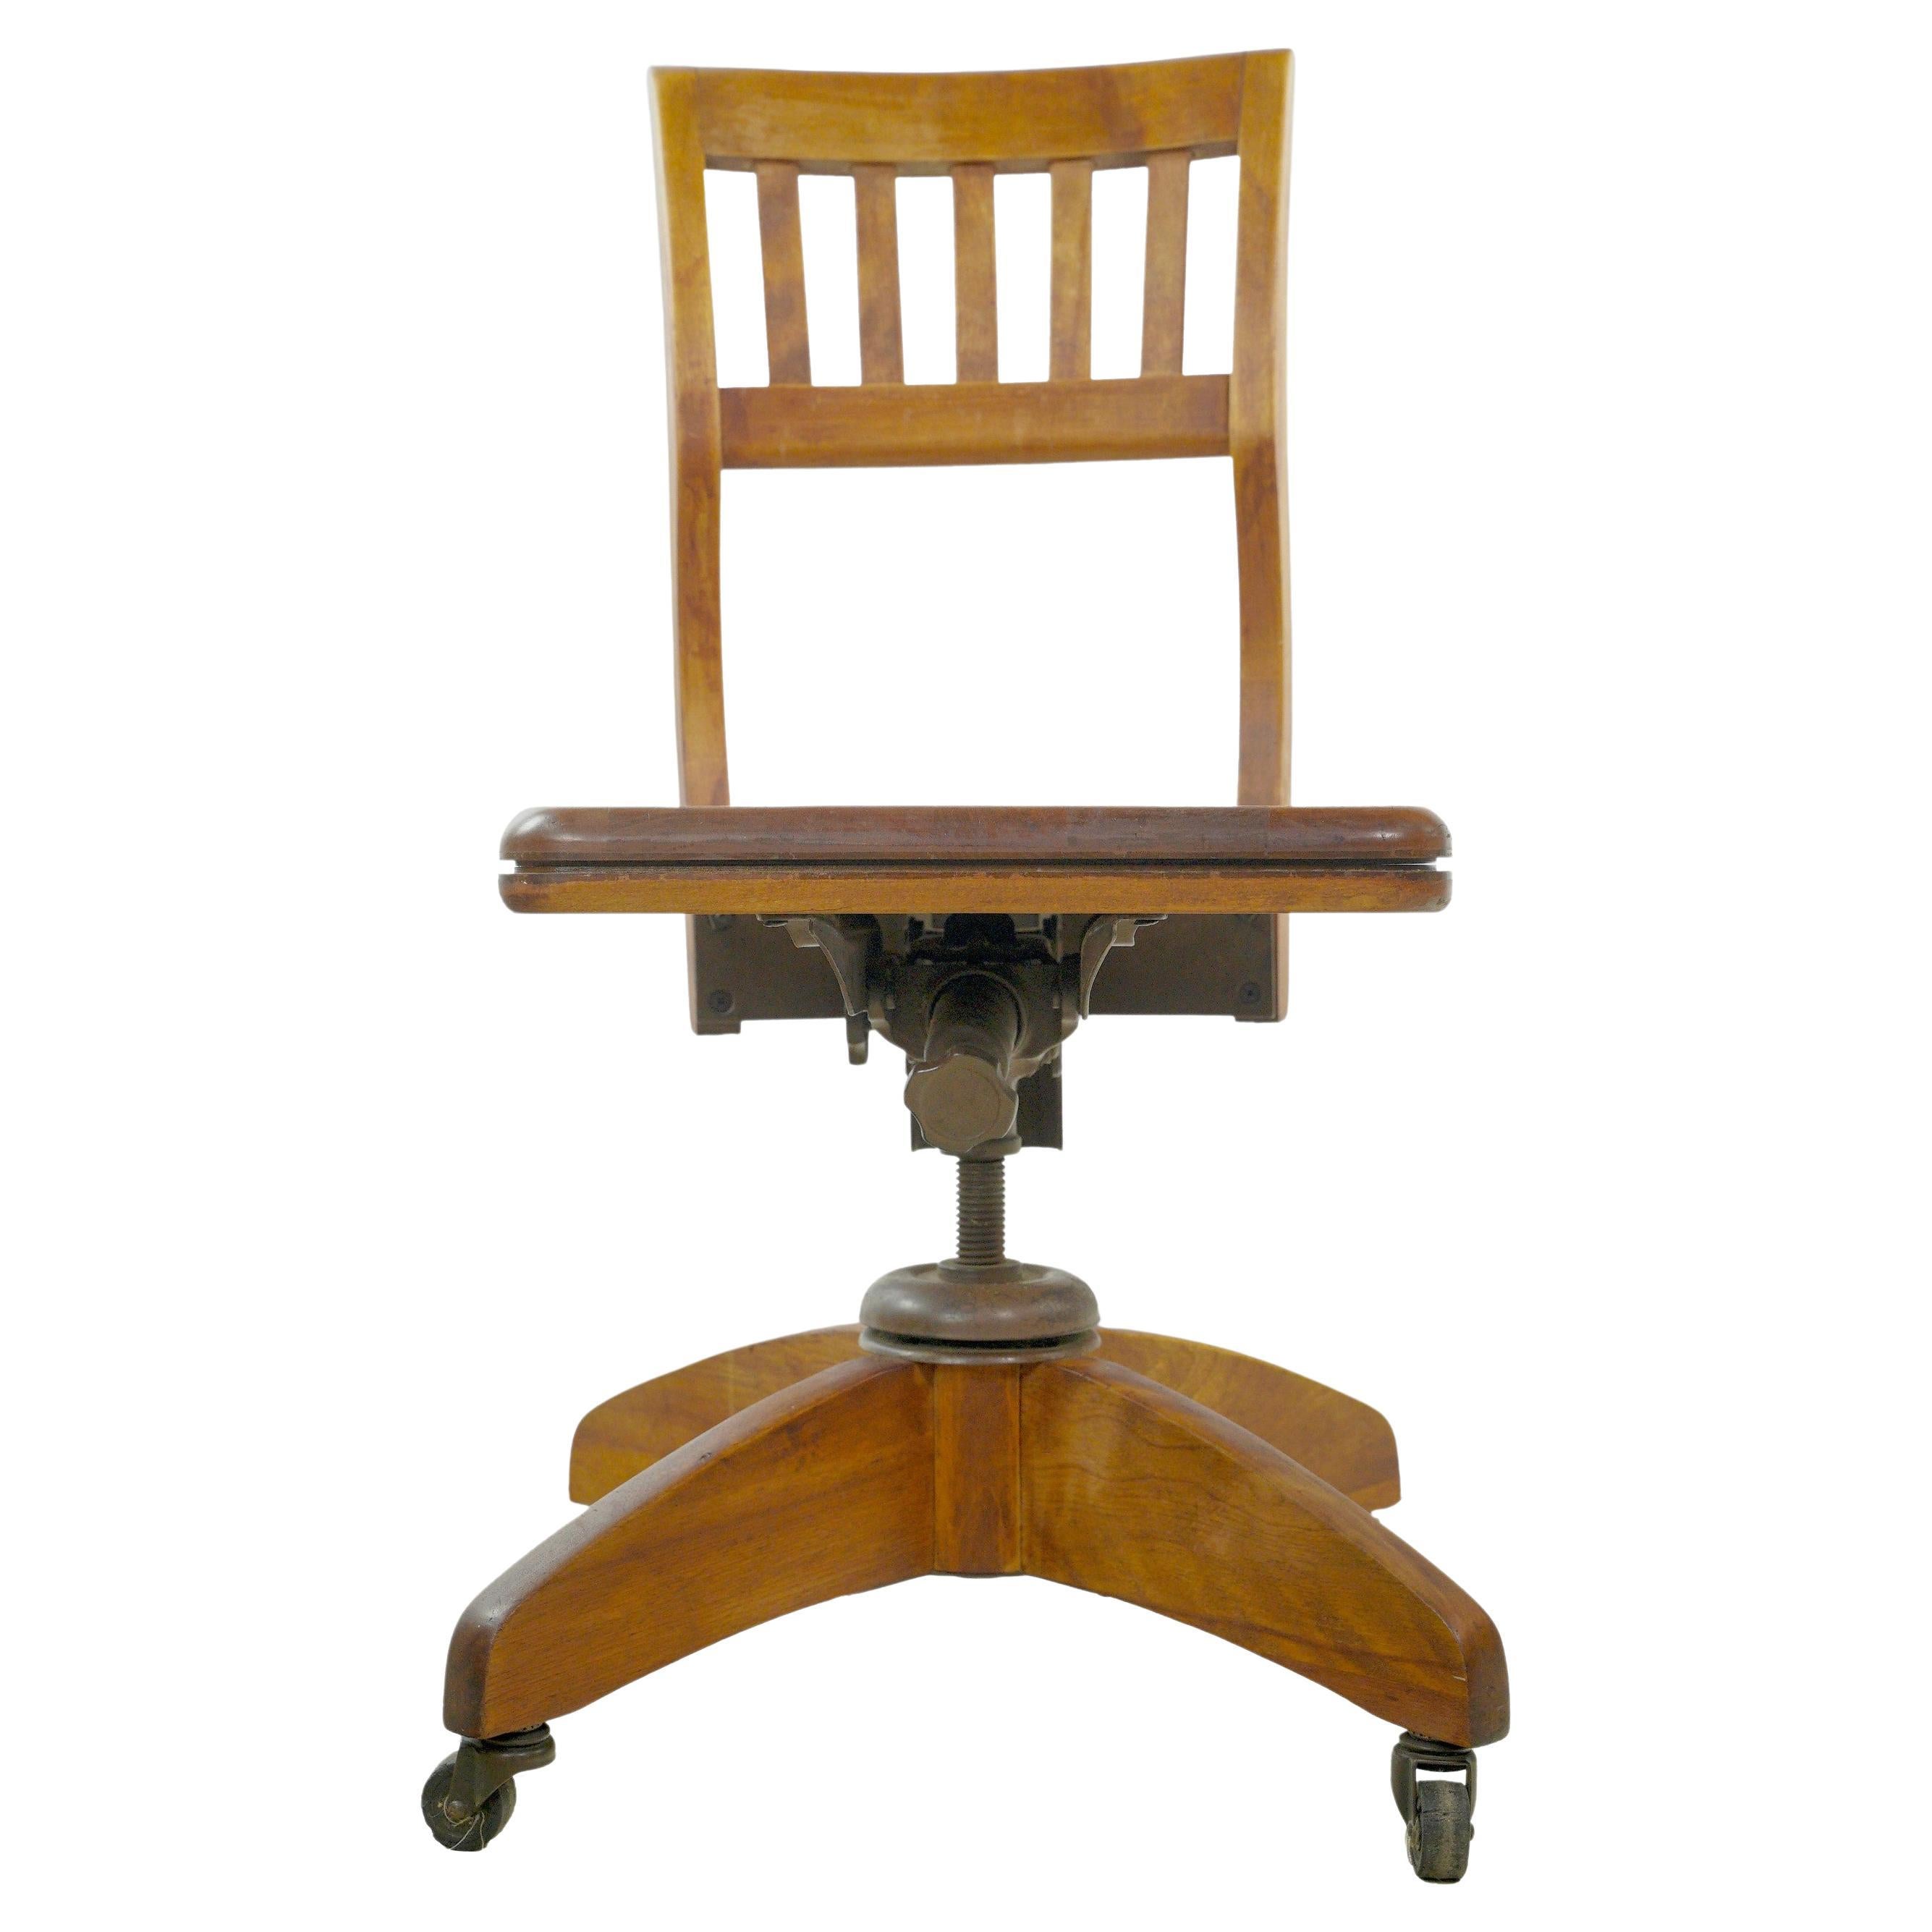 Antique Adjustable Height Wooden Desk Chair w Casters